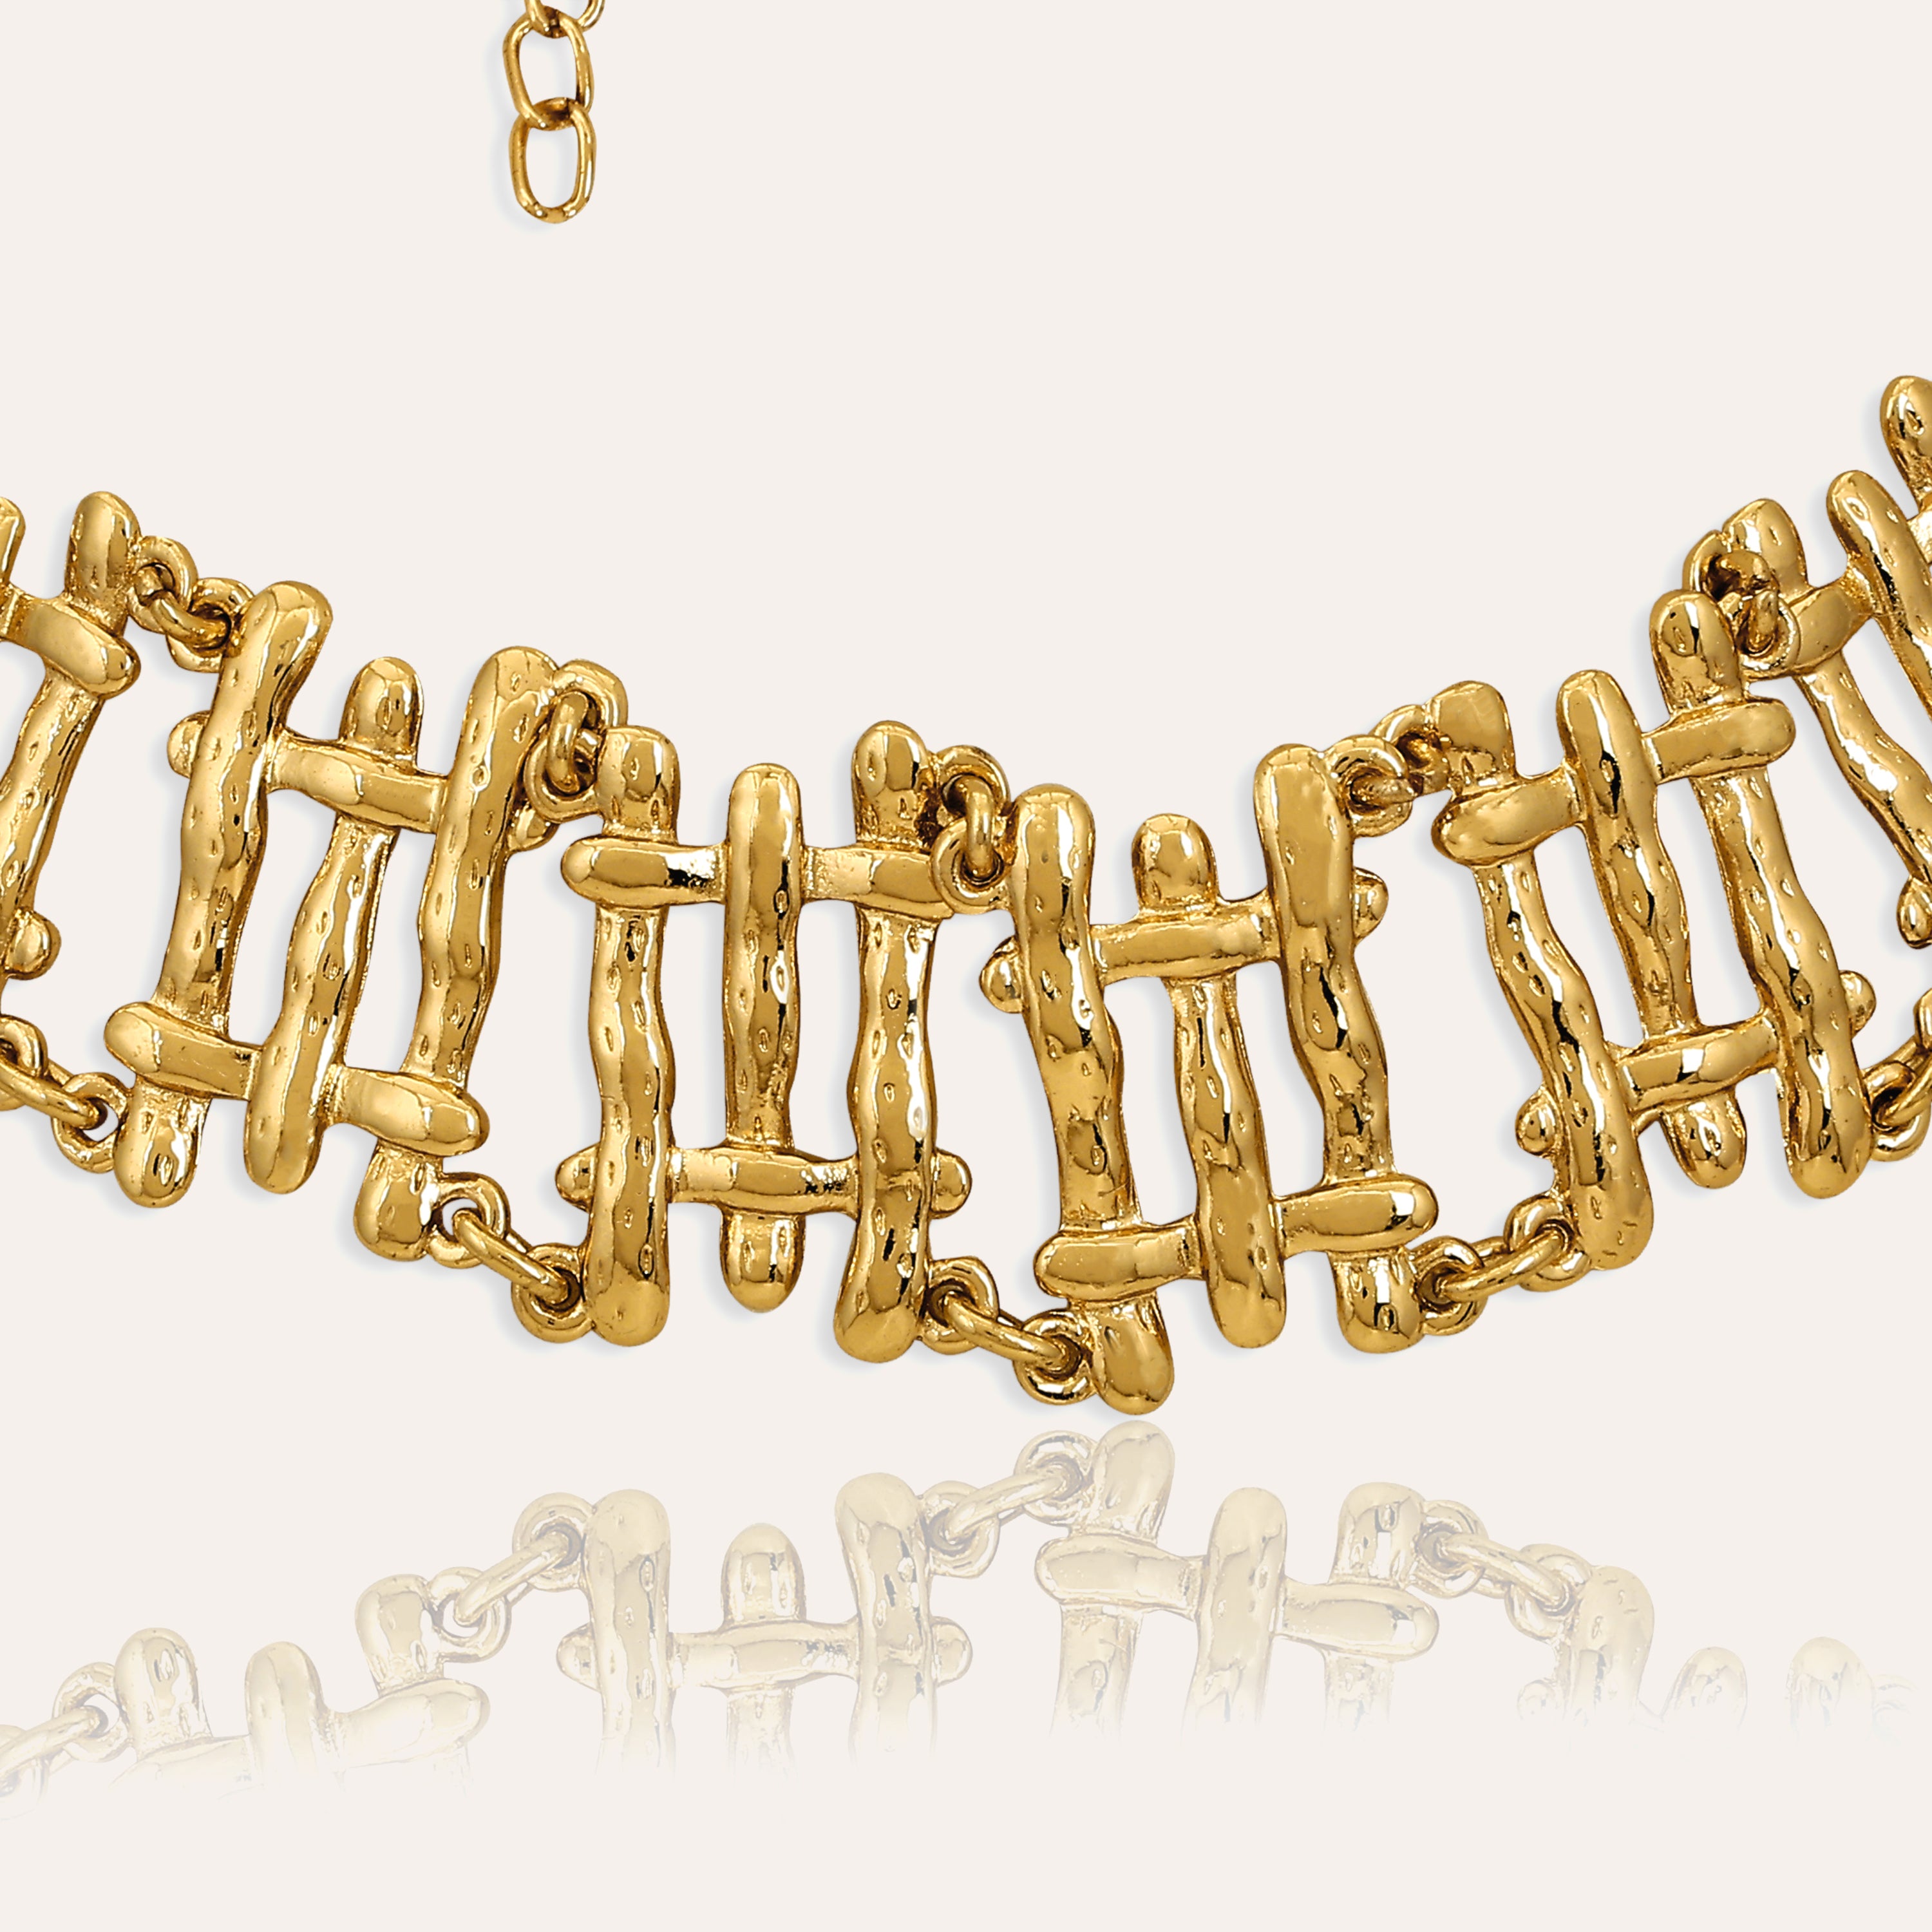 TFC Squeezy Squish Gold Plated Choker Necklace-Enhance your elegance with our collection of gold-plated necklaces for women. Choose from stunning pendant necklaces, chic choker necklaces, and trendy layered necklaces. Our sleek and dainty designs are both affordable and anti-tarnish, ensuring lasting beauty. Enjoy the cheapest fashion jewellery, lightweight and stylish- only at The Fun Company